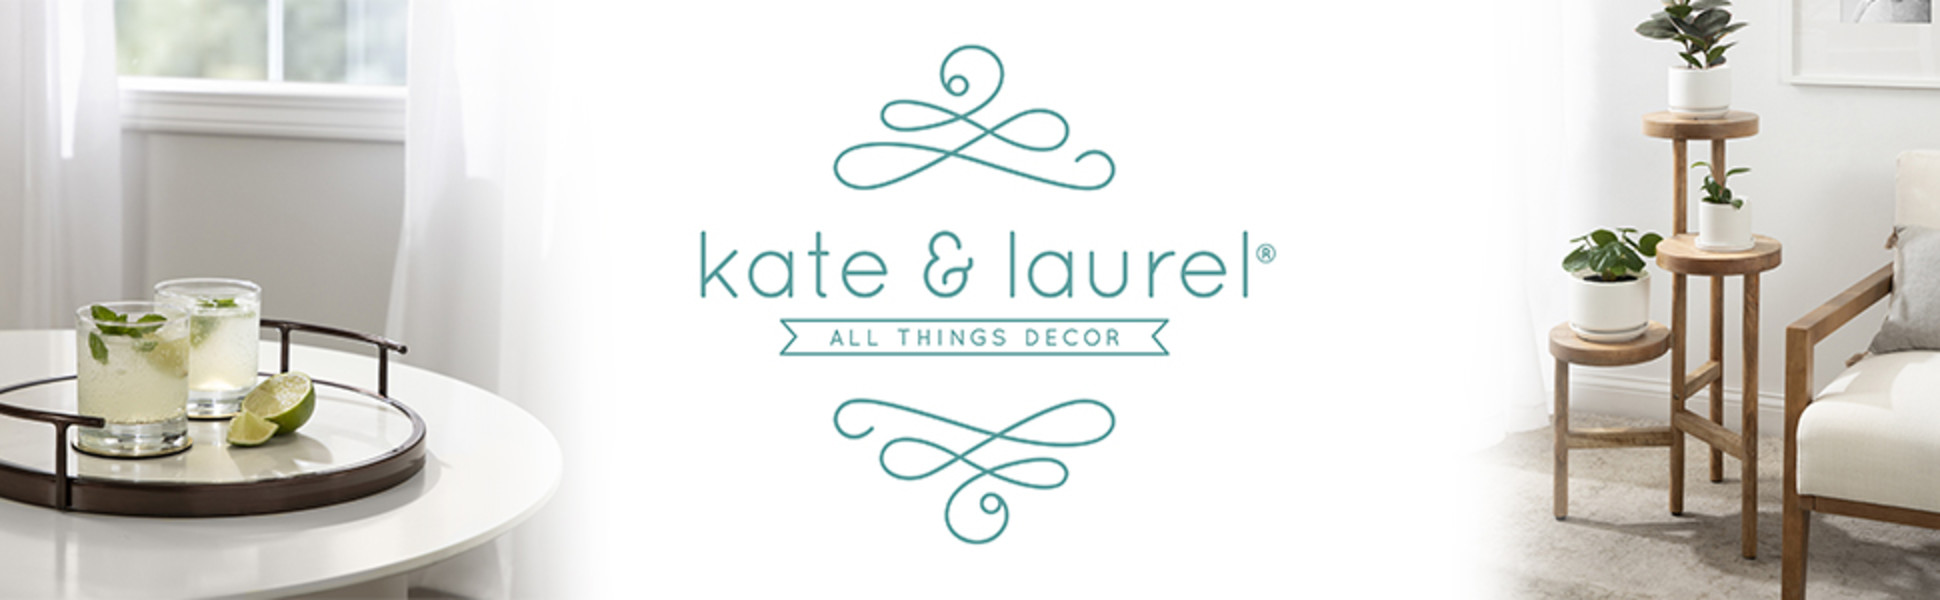 Kate and Laurel Banner Image with Round Decorative Food Tray and Plant Pedestal Stand